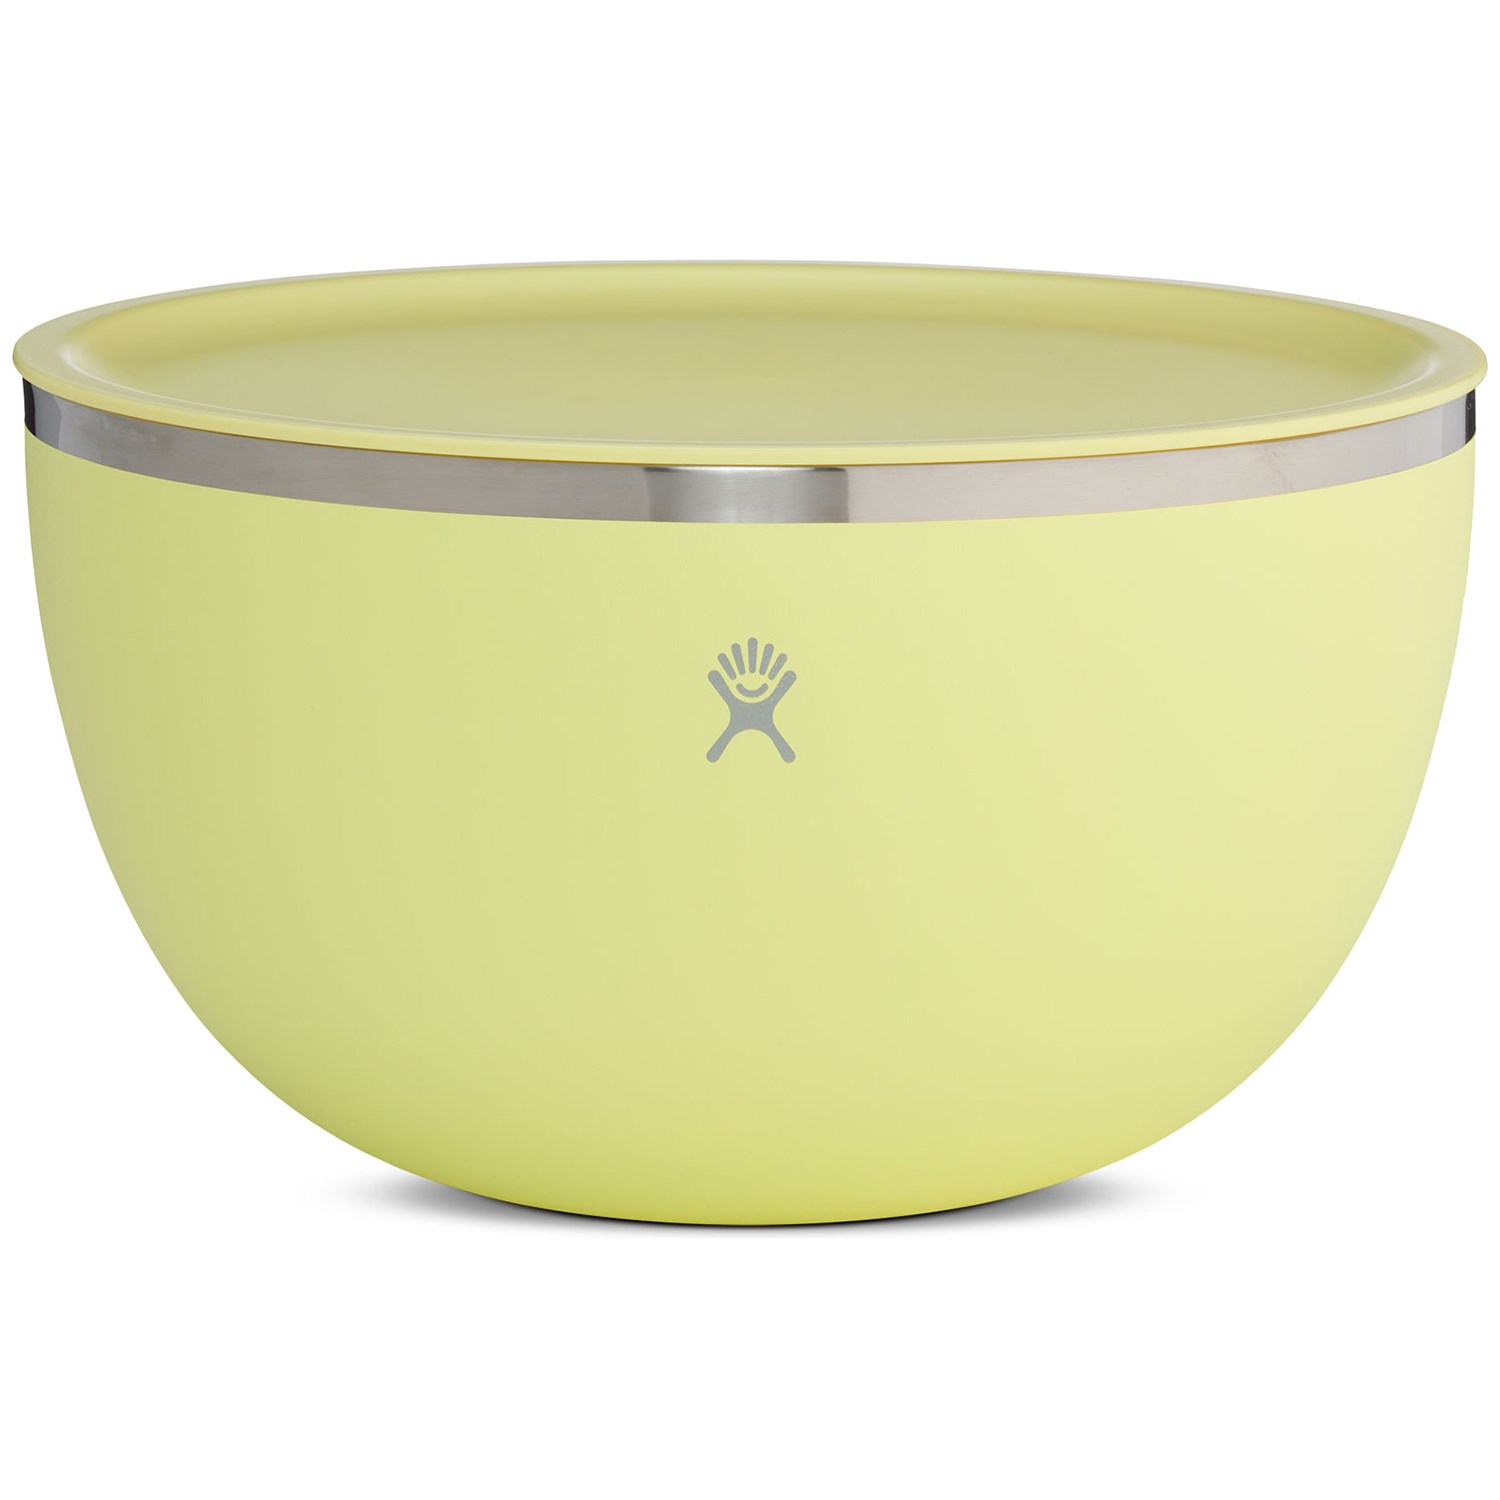 Hydro Flask 3 Quart Serving Bowl with Lid | evo